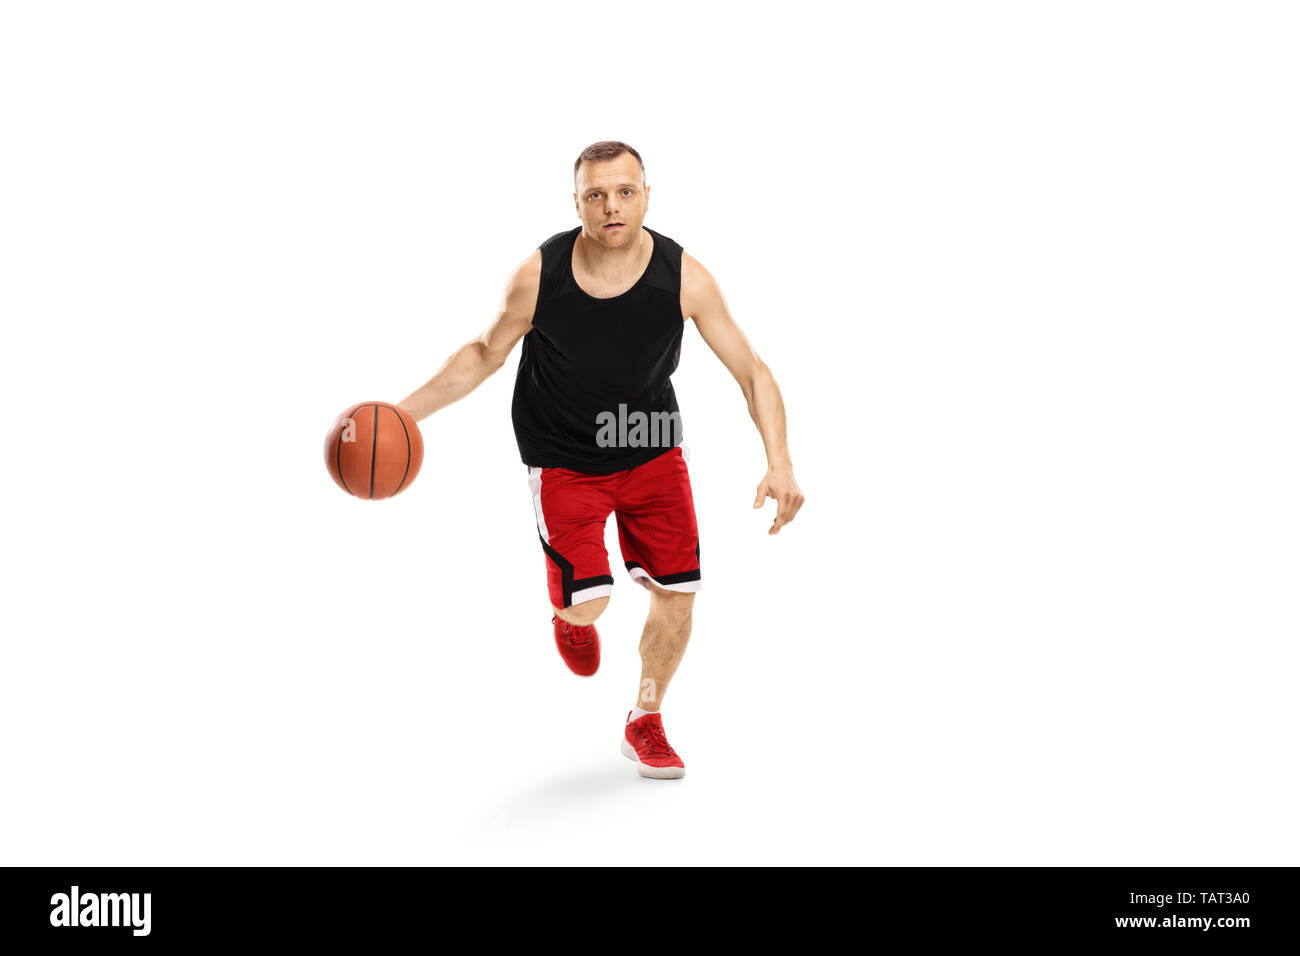 Full length portrait of a man running towards the camera with a basketball isolated on white background Stock Photo